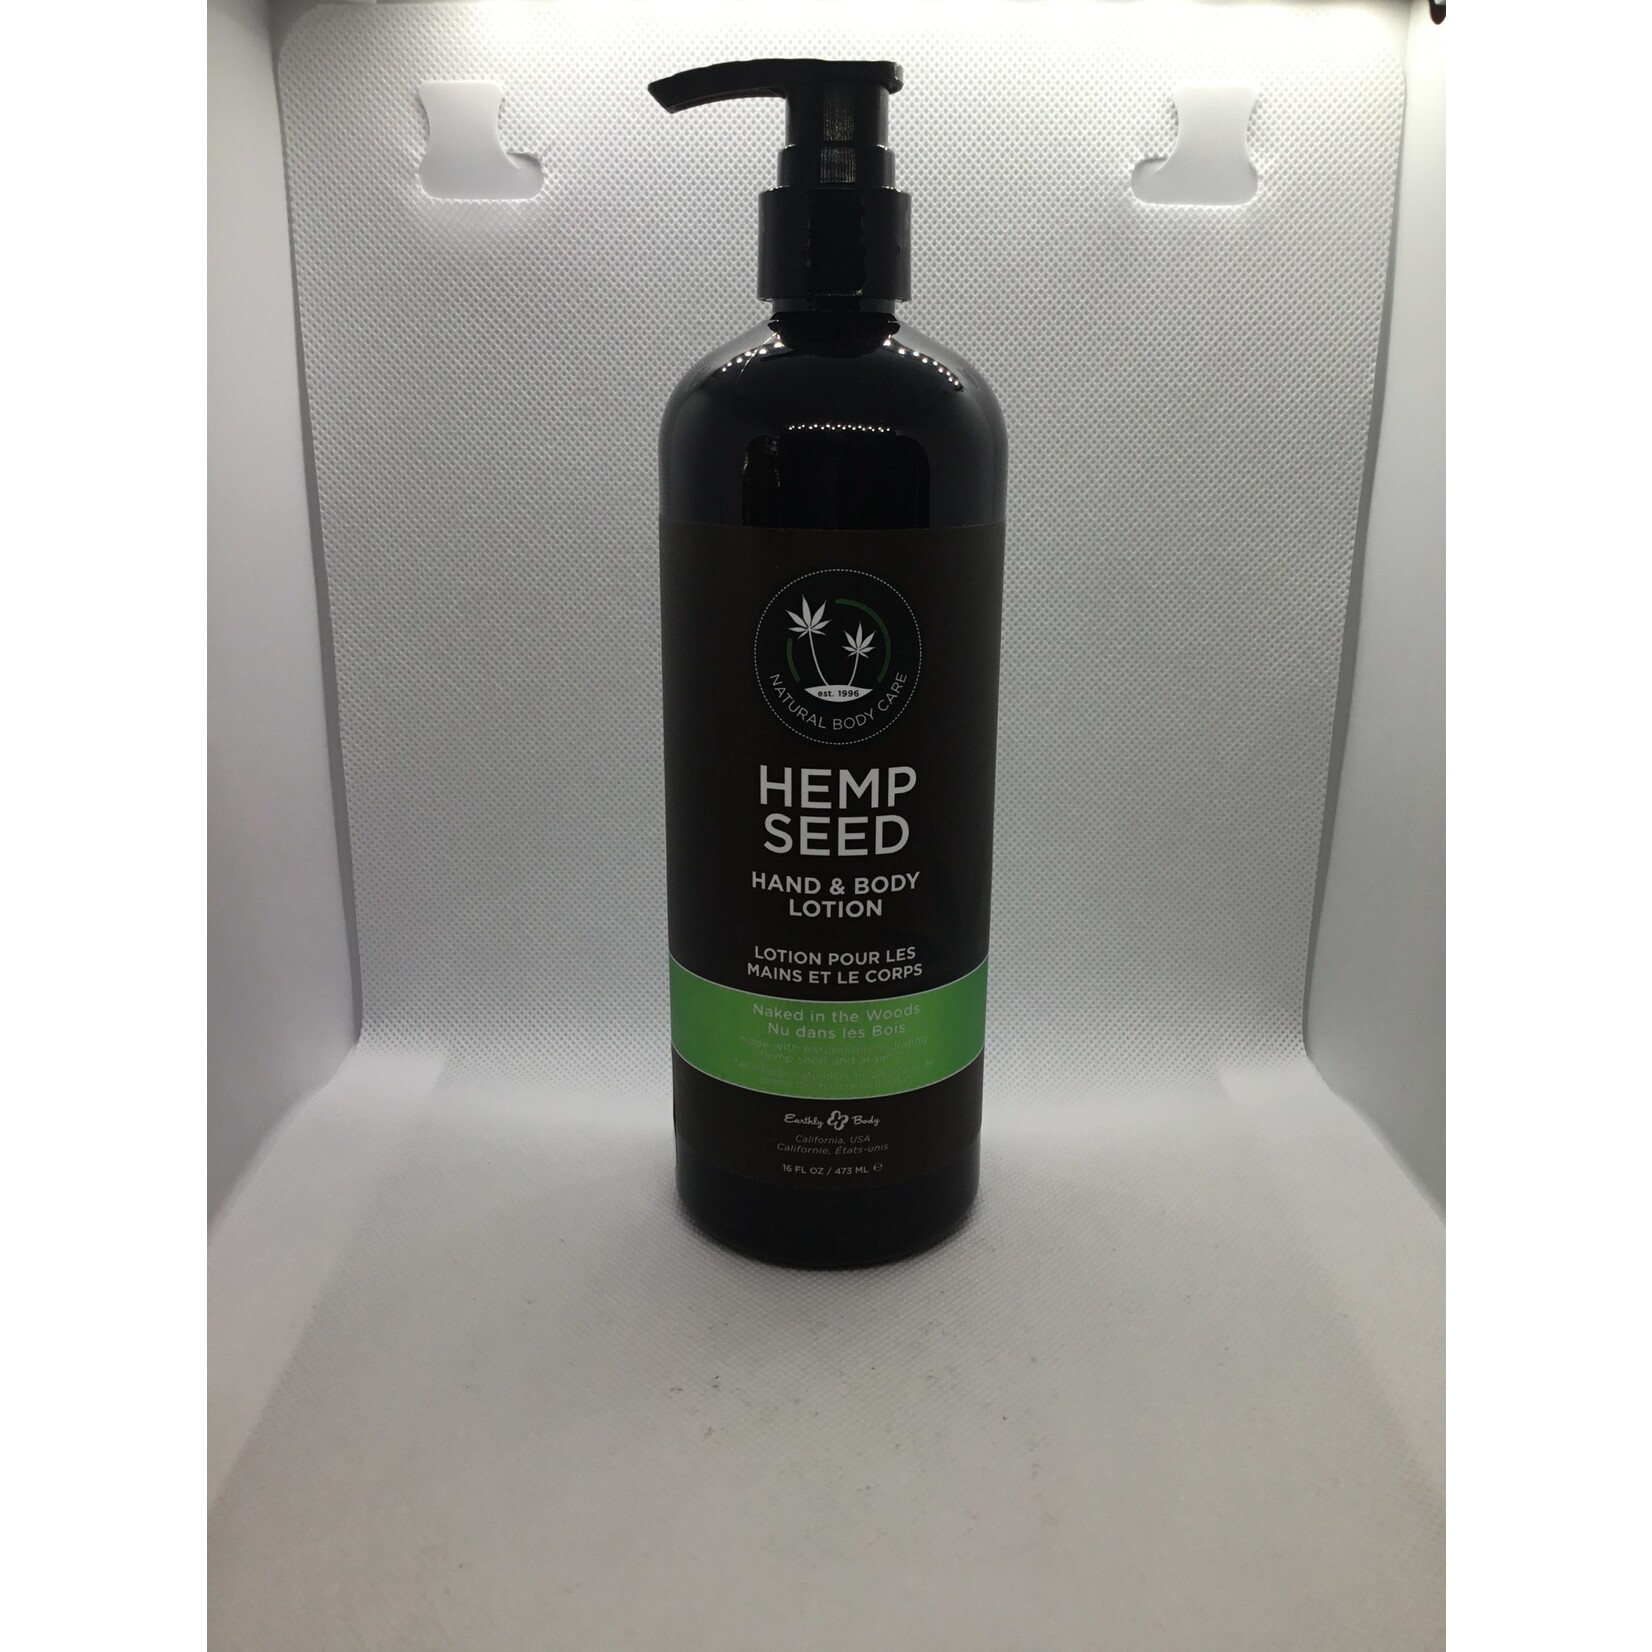 Earthly Body Hand & Body Lotion 16oz